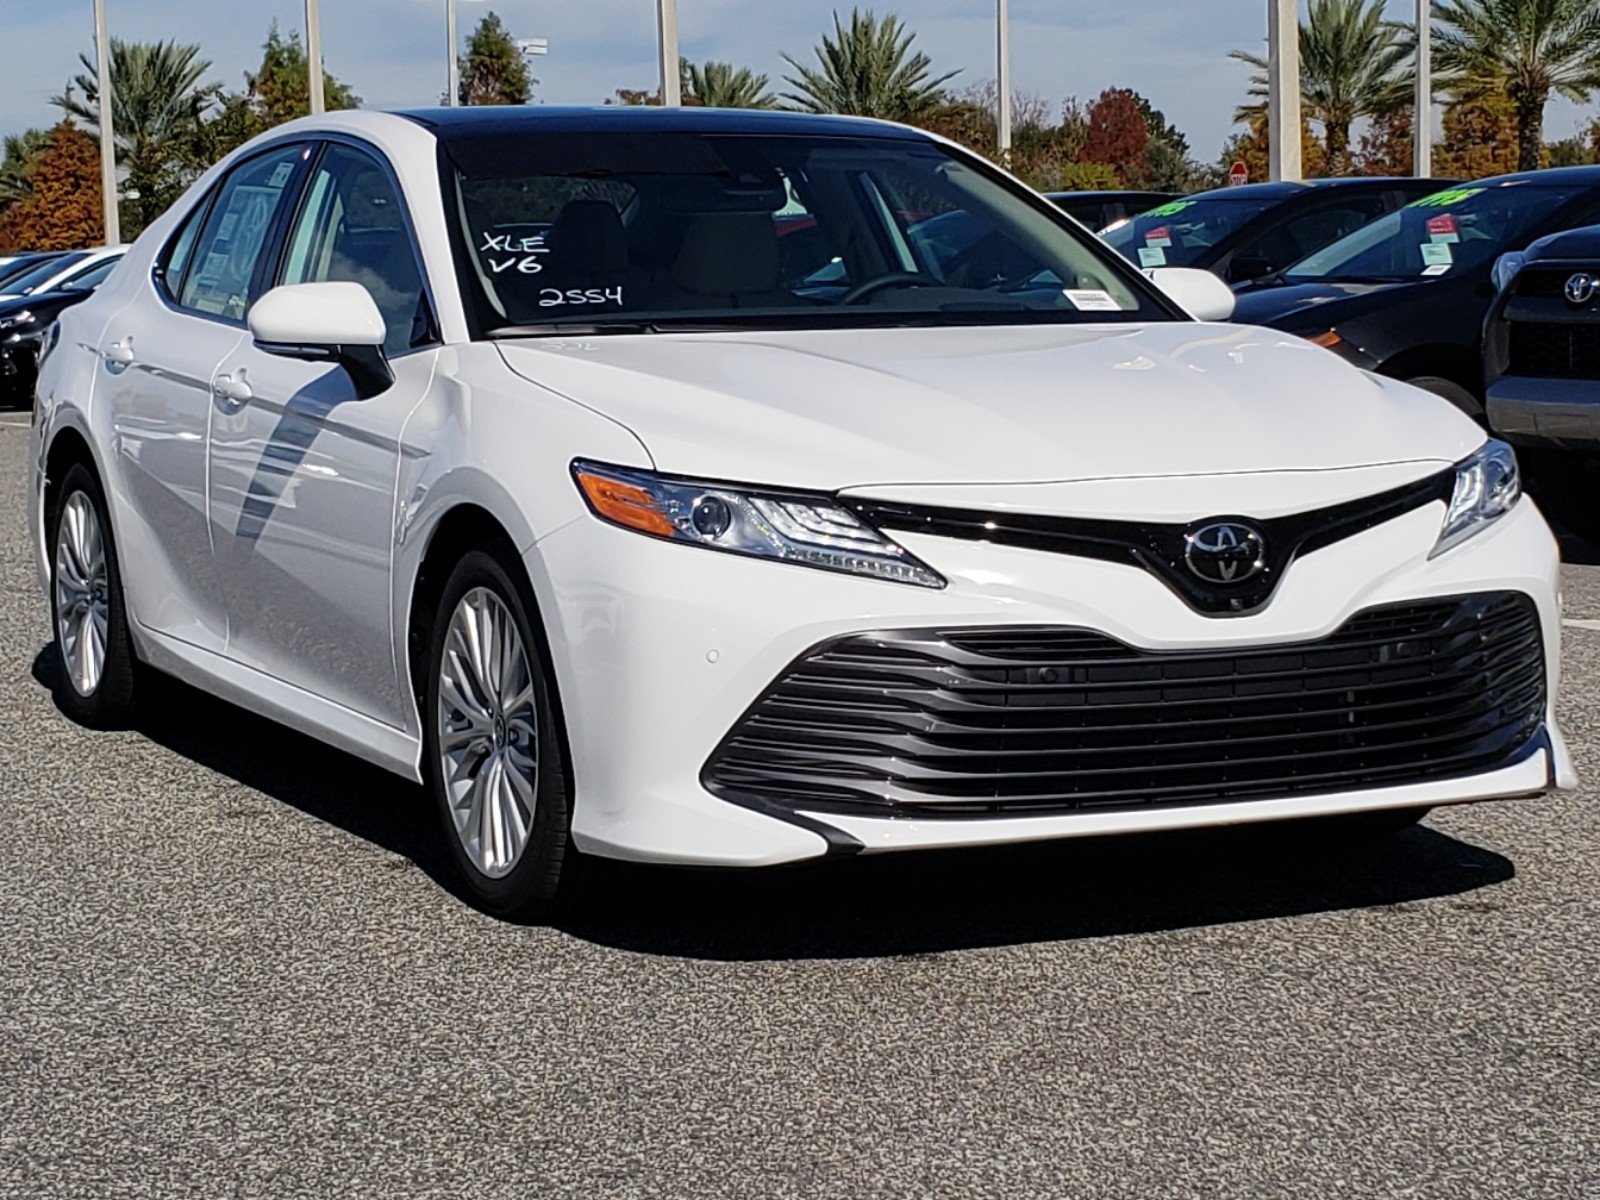 New 2019 Toyota Camry XLE V6 4dr Car in Orlando #9250257 | Toyota of